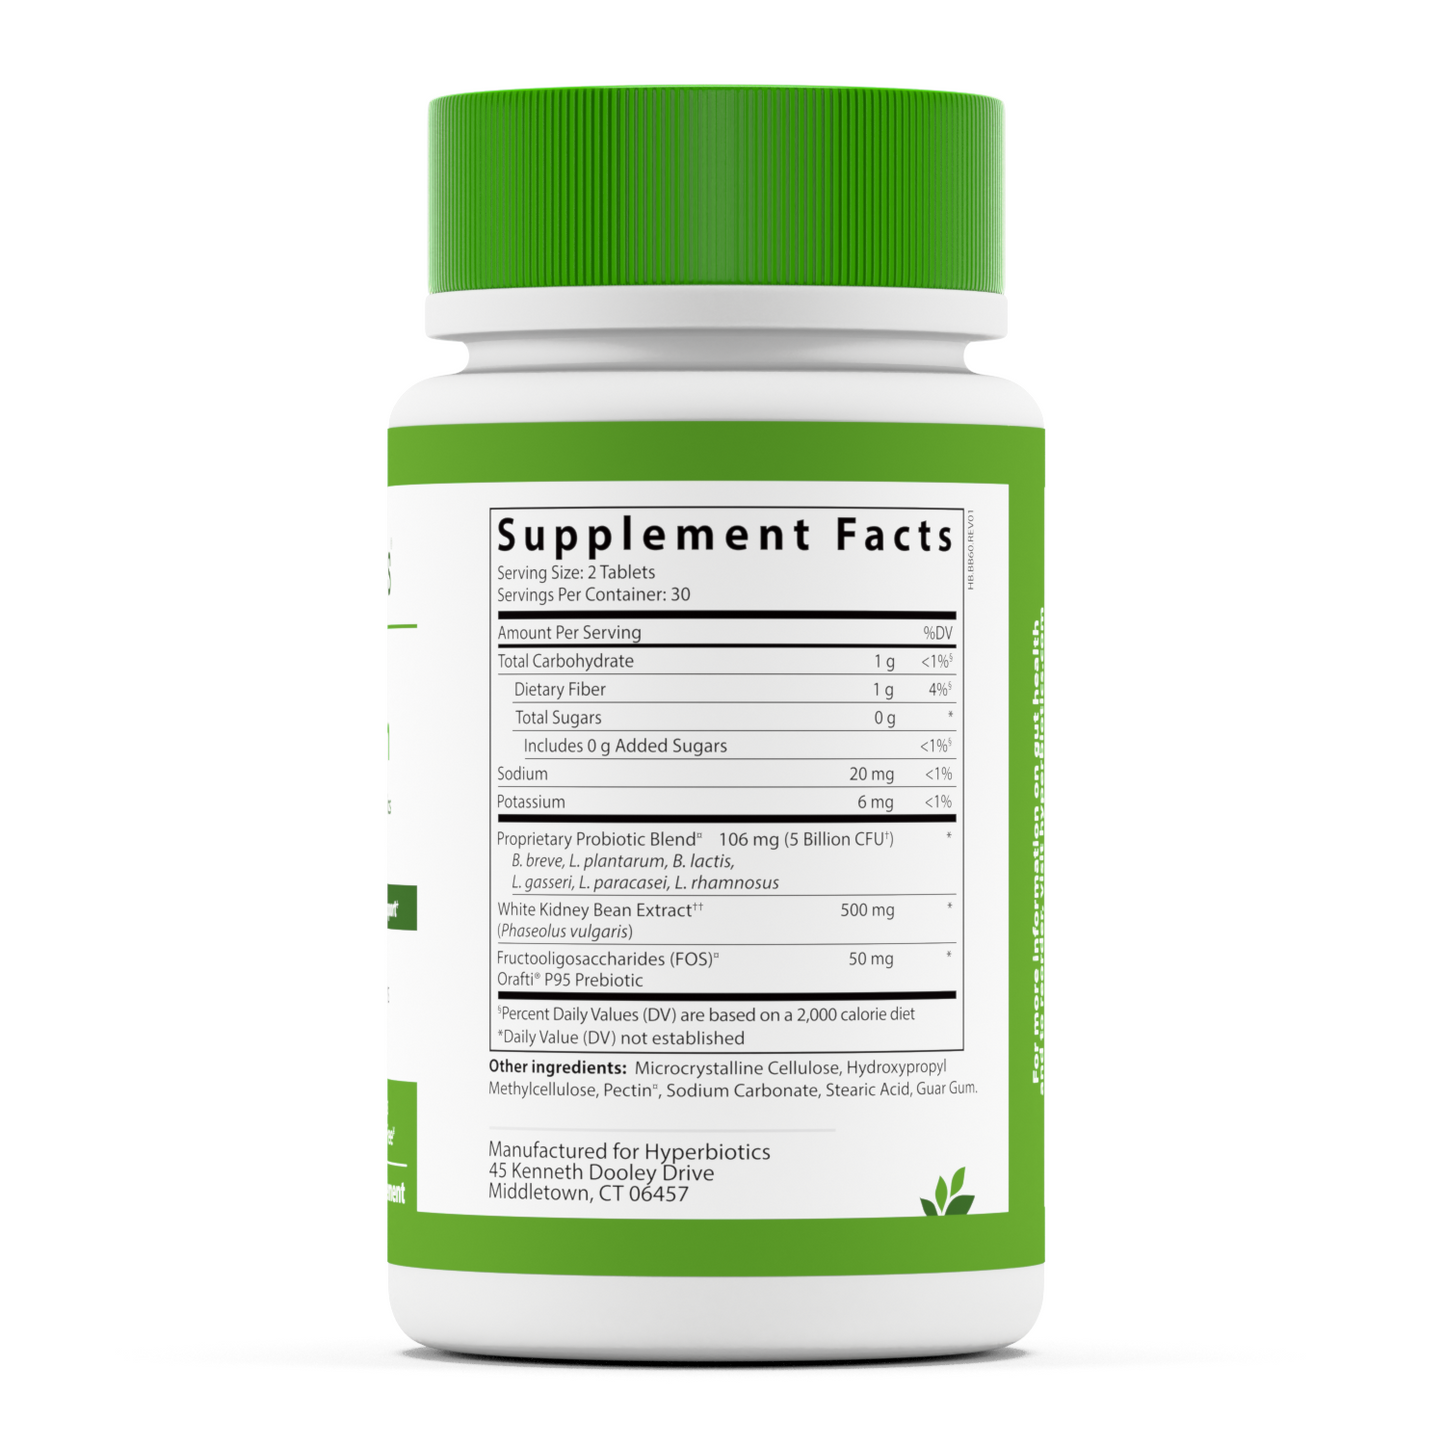 Hyperbiotics PRO-Lean: Satiety and Healthy Metabolic Support Probiotic Supplement Facts